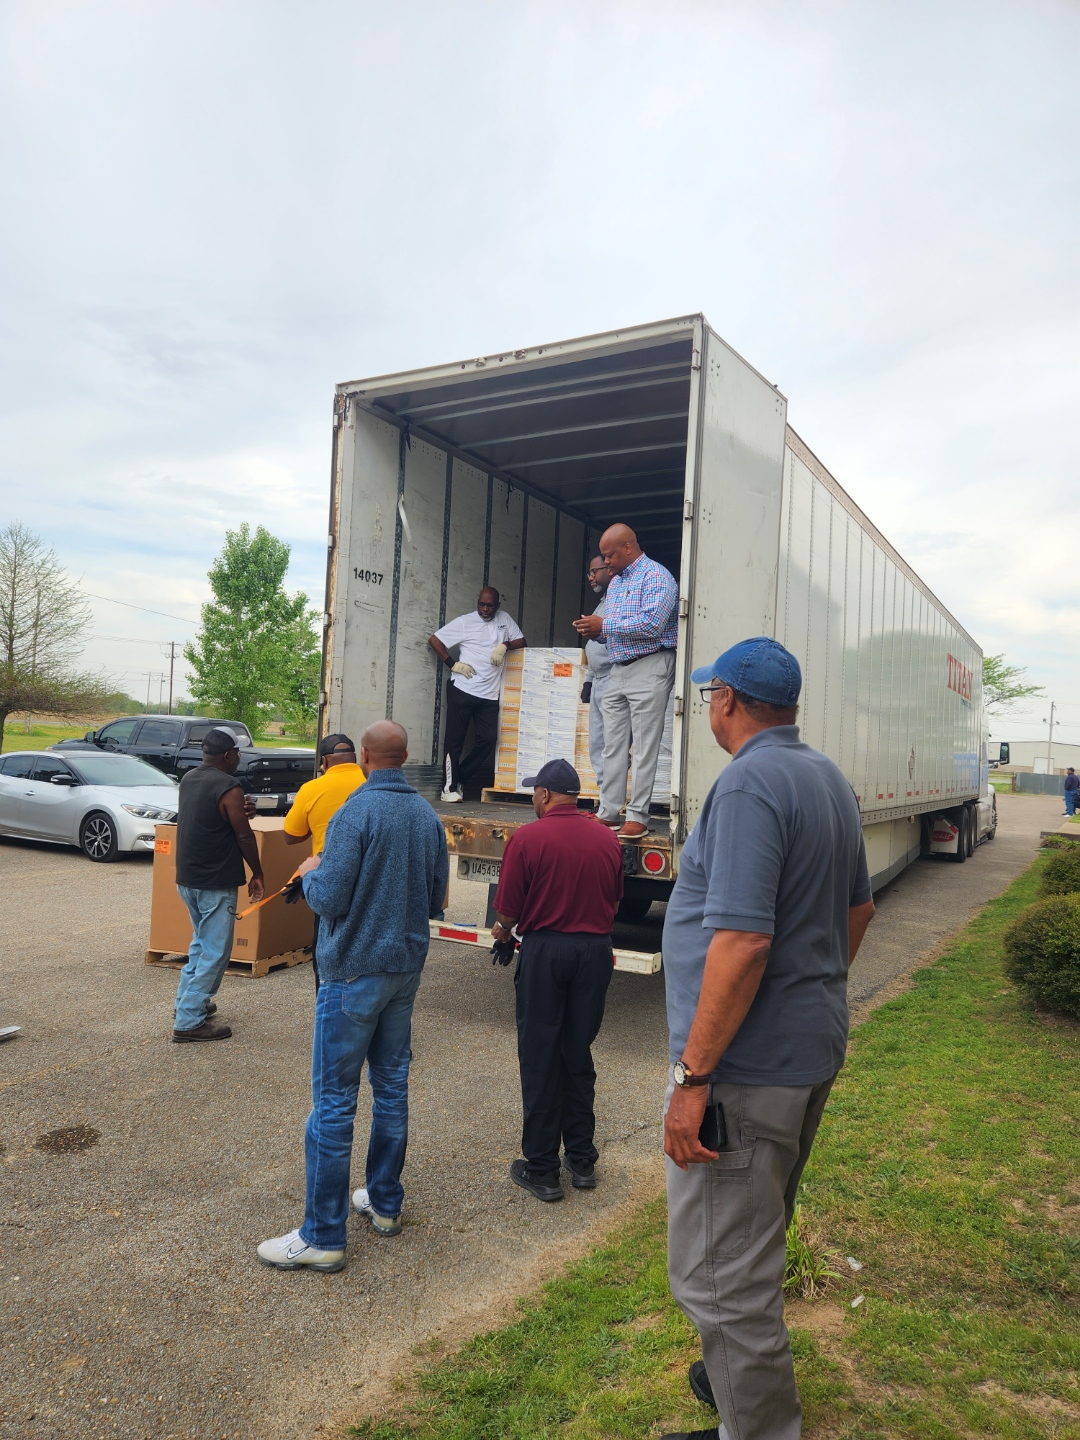 CAP Operation Sharing Delivers Items to Little Rock after Tornadoes